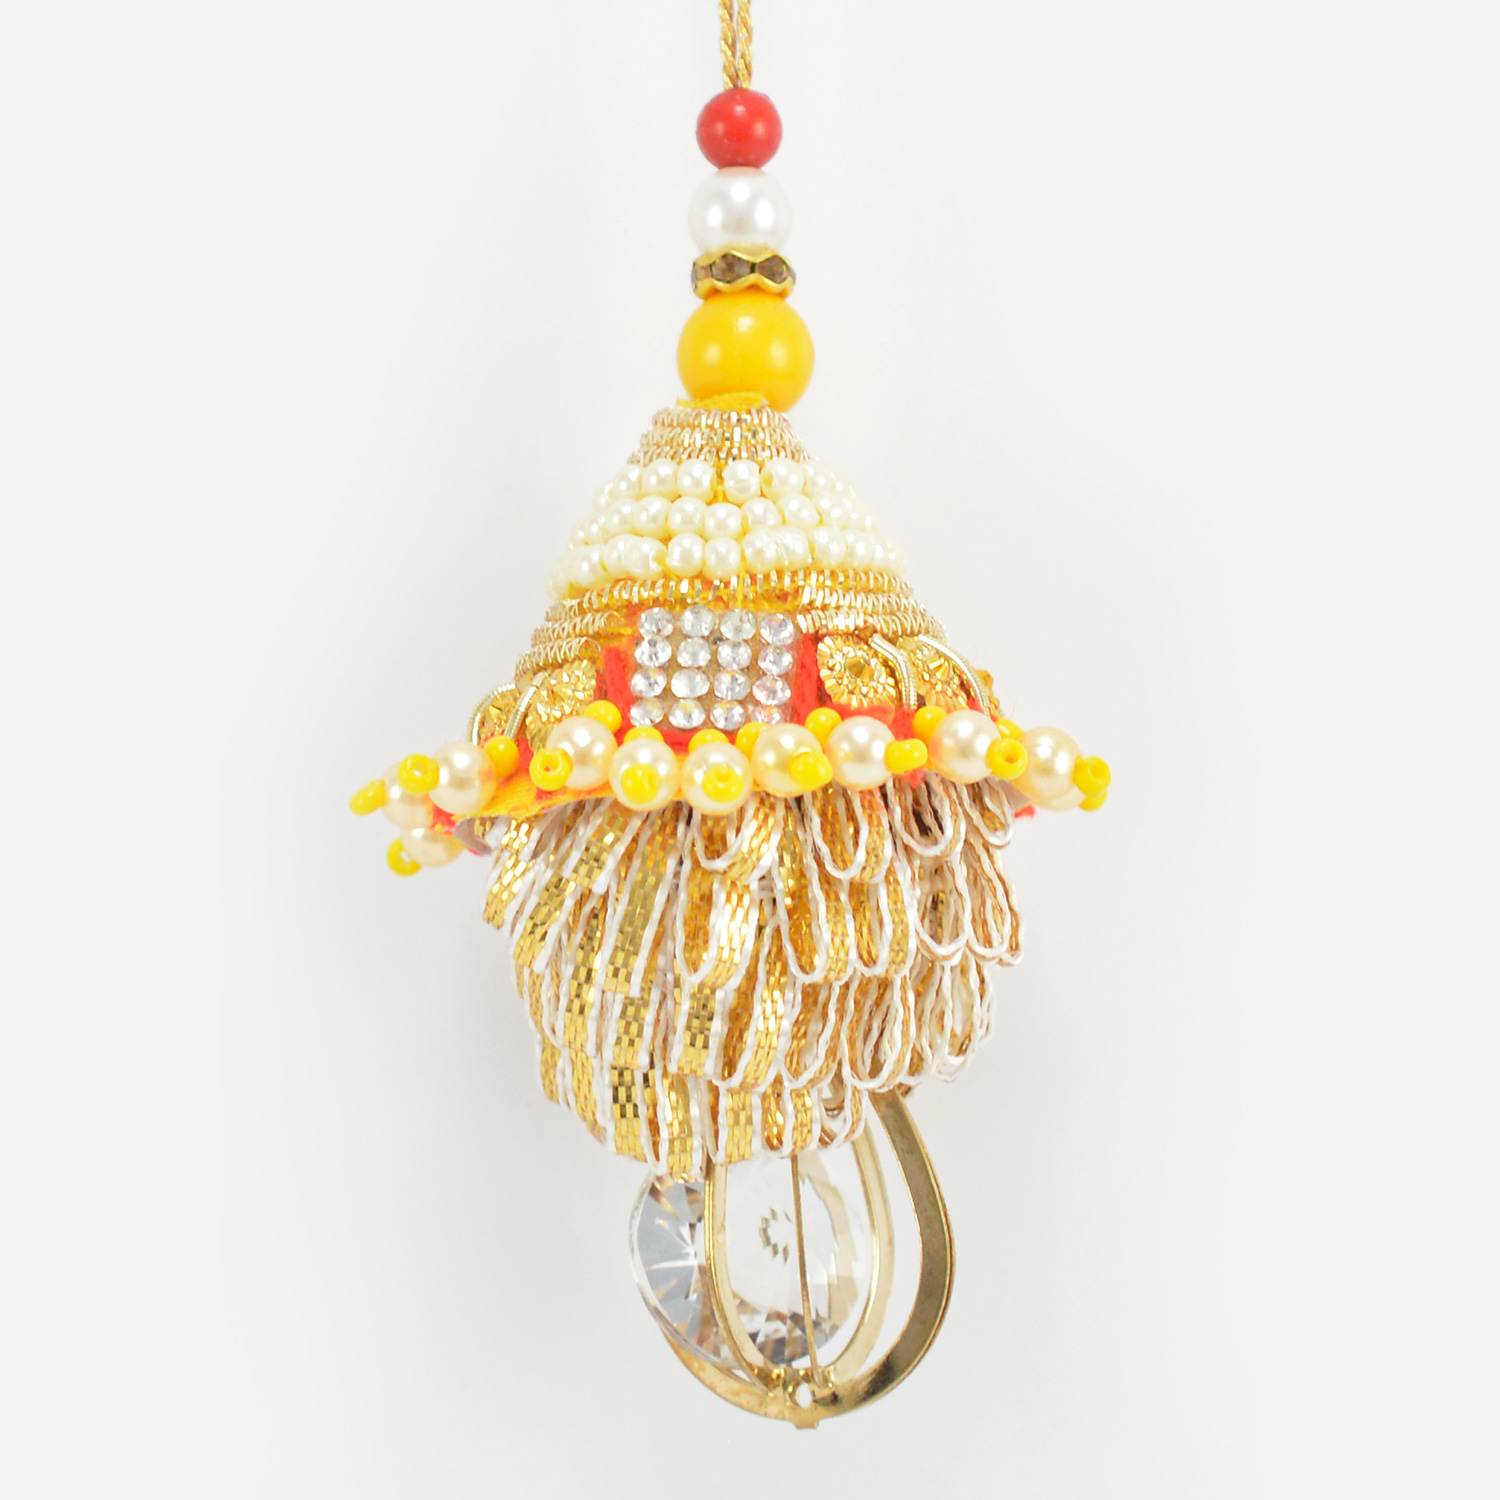 Handcrafted Rich Looking Yellow and Golden Color Diamond and Bead Lumba Rakhi